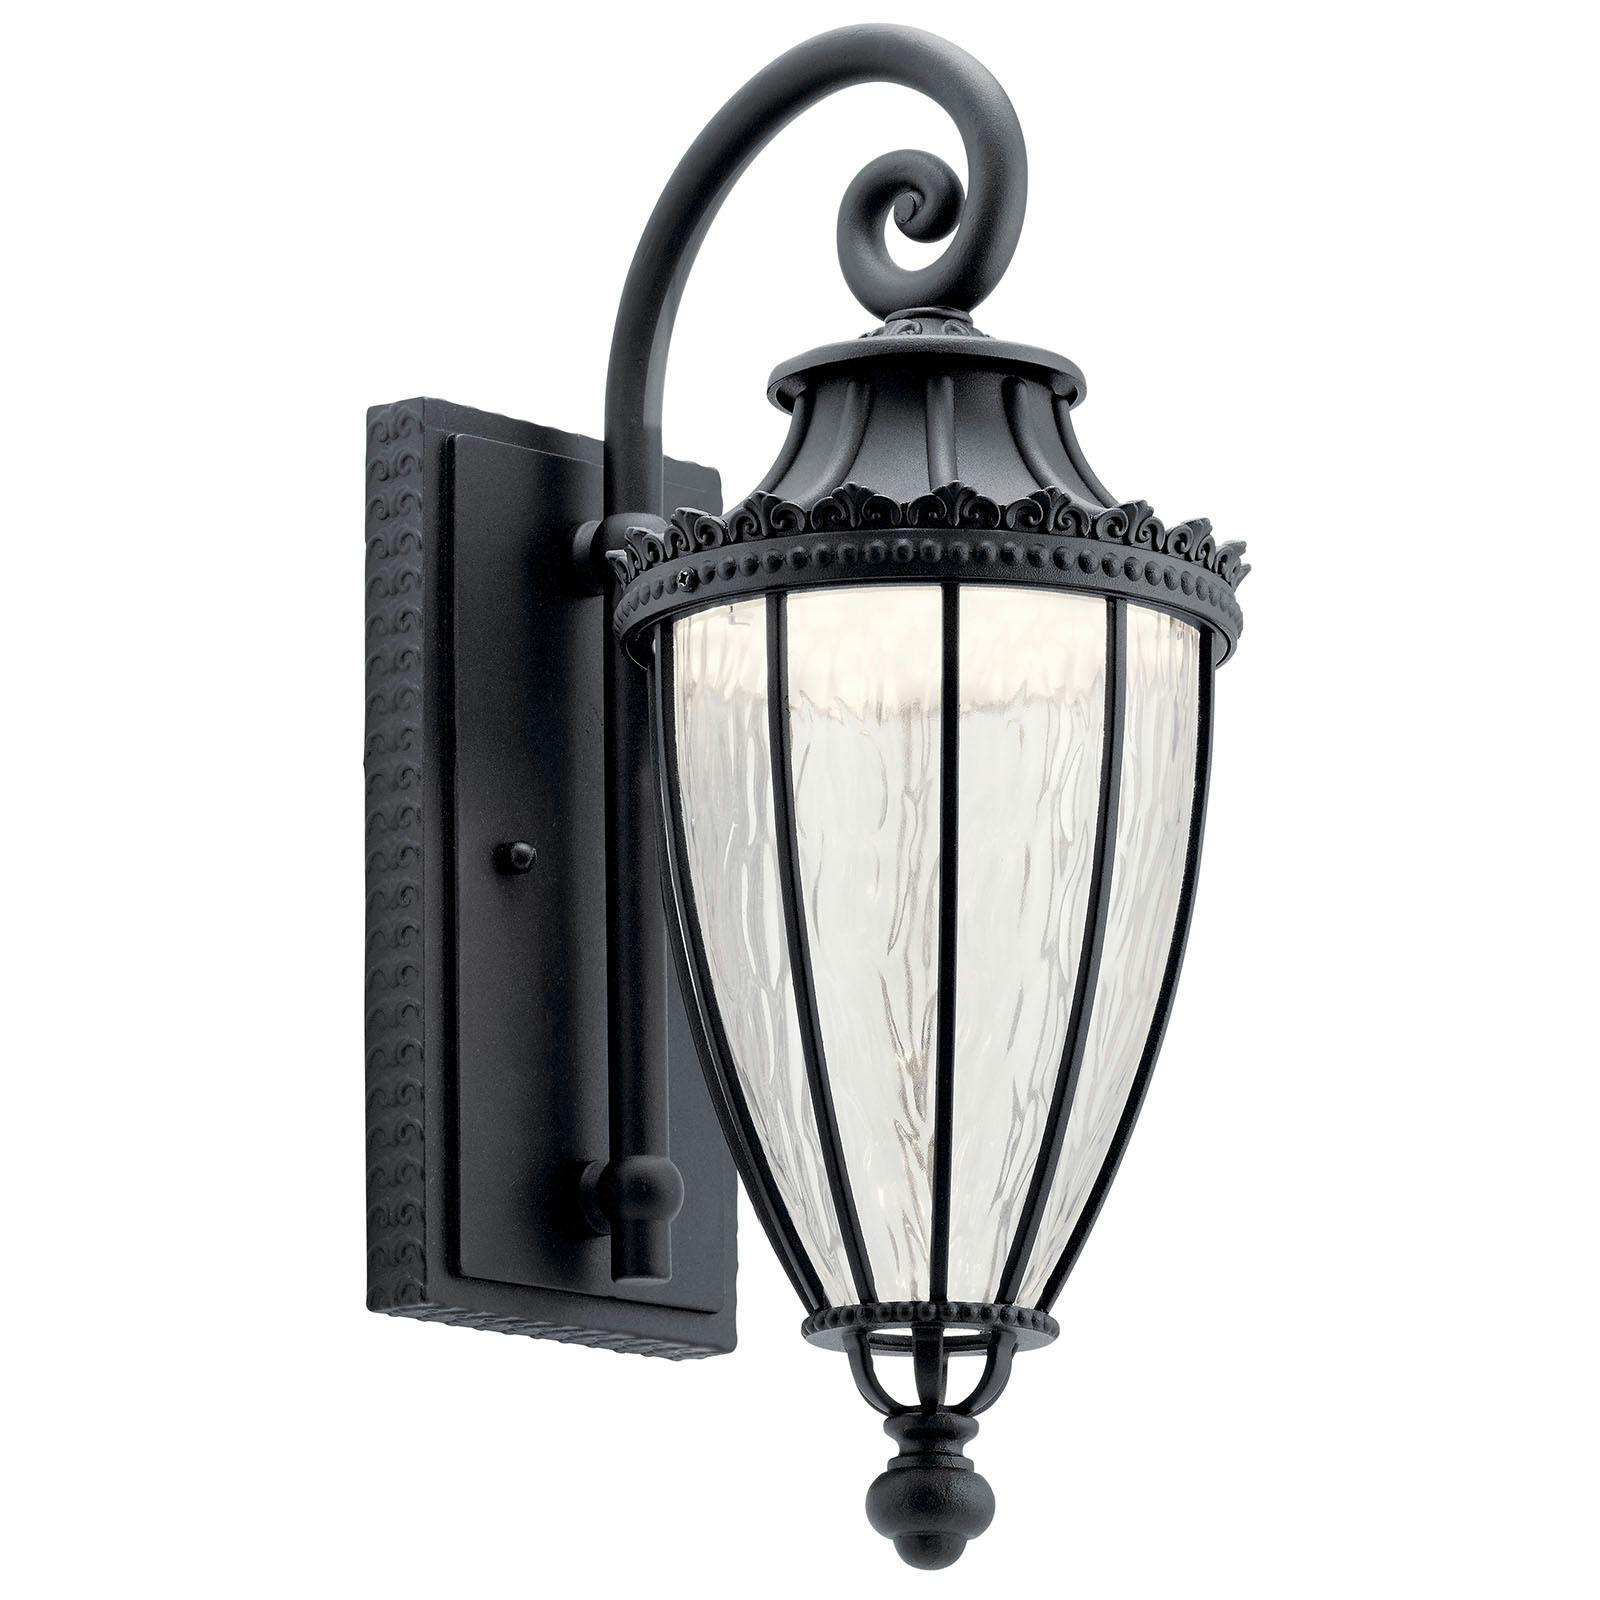 Wakefield 17.75" LED Wall Light Black on a white background